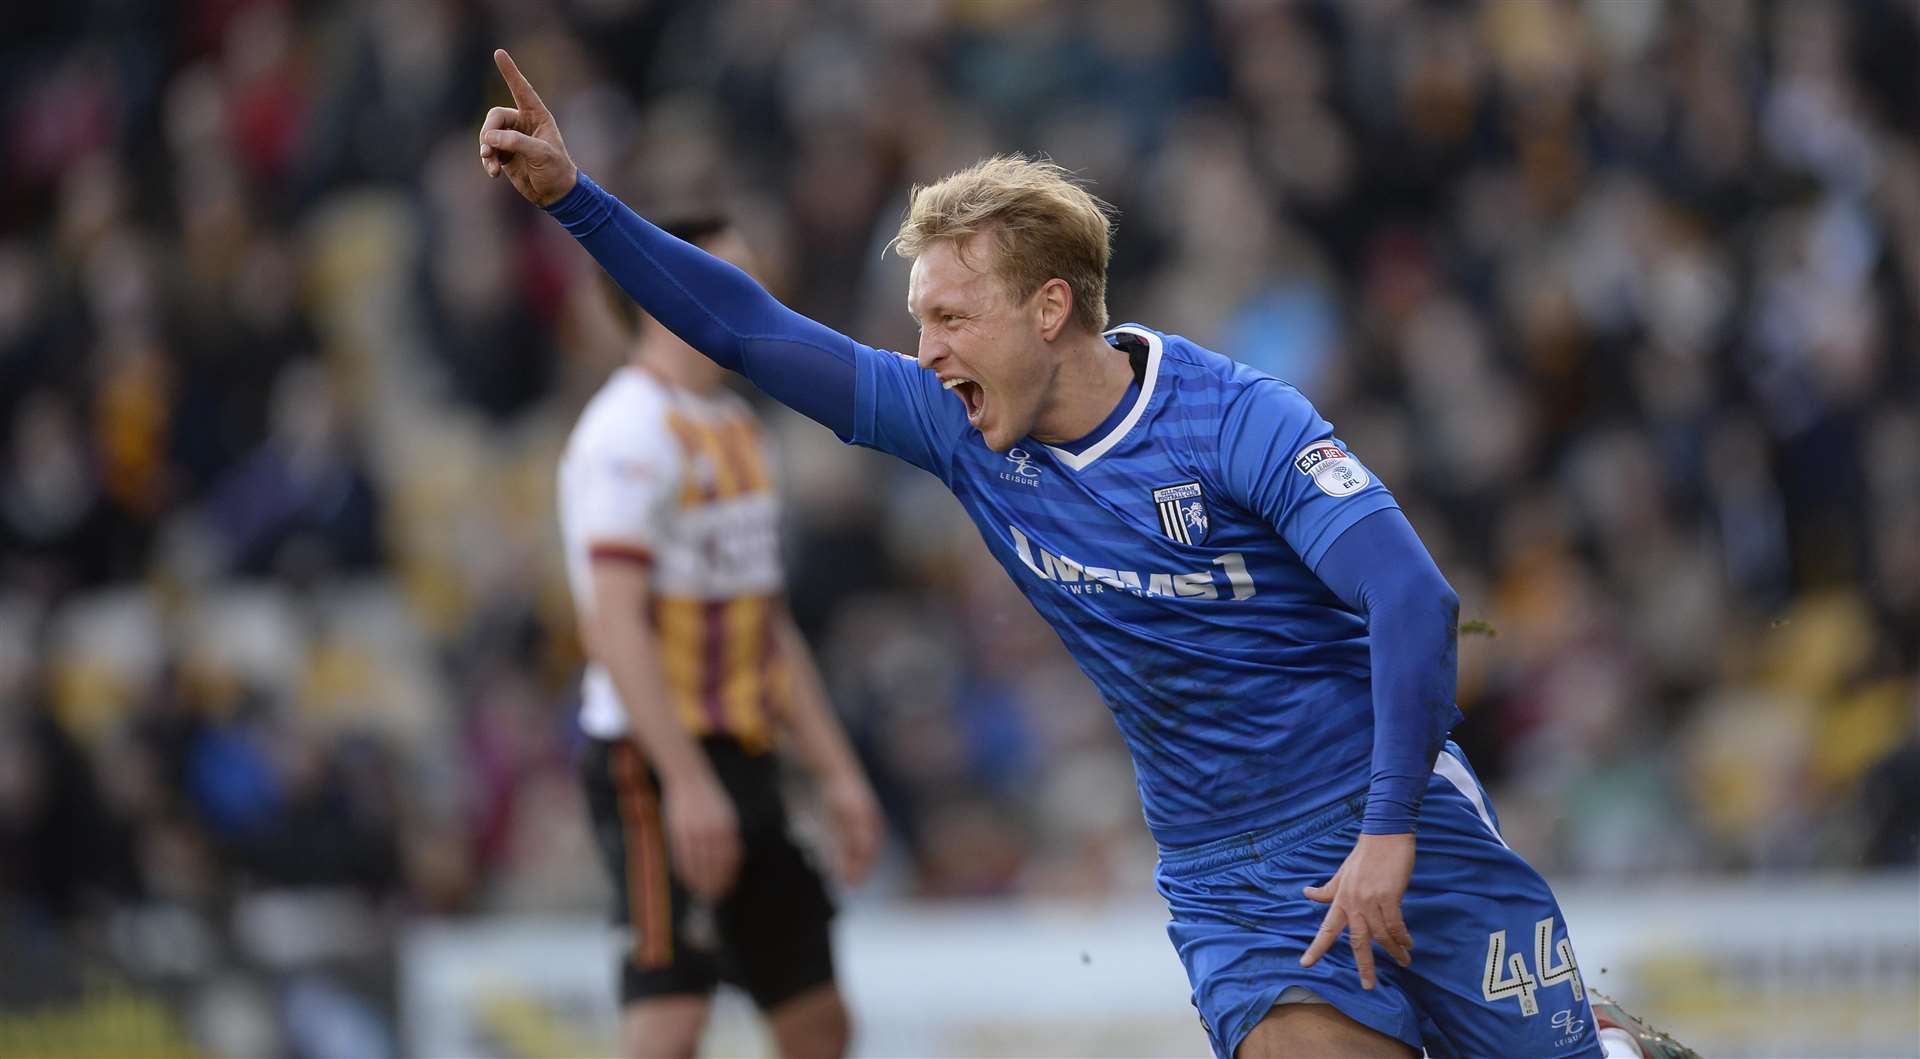 Josh Wright celebrates opening the scoring against Bradford City for the Gills at Valley Parade in February 2017 Picture: Ady Kerry